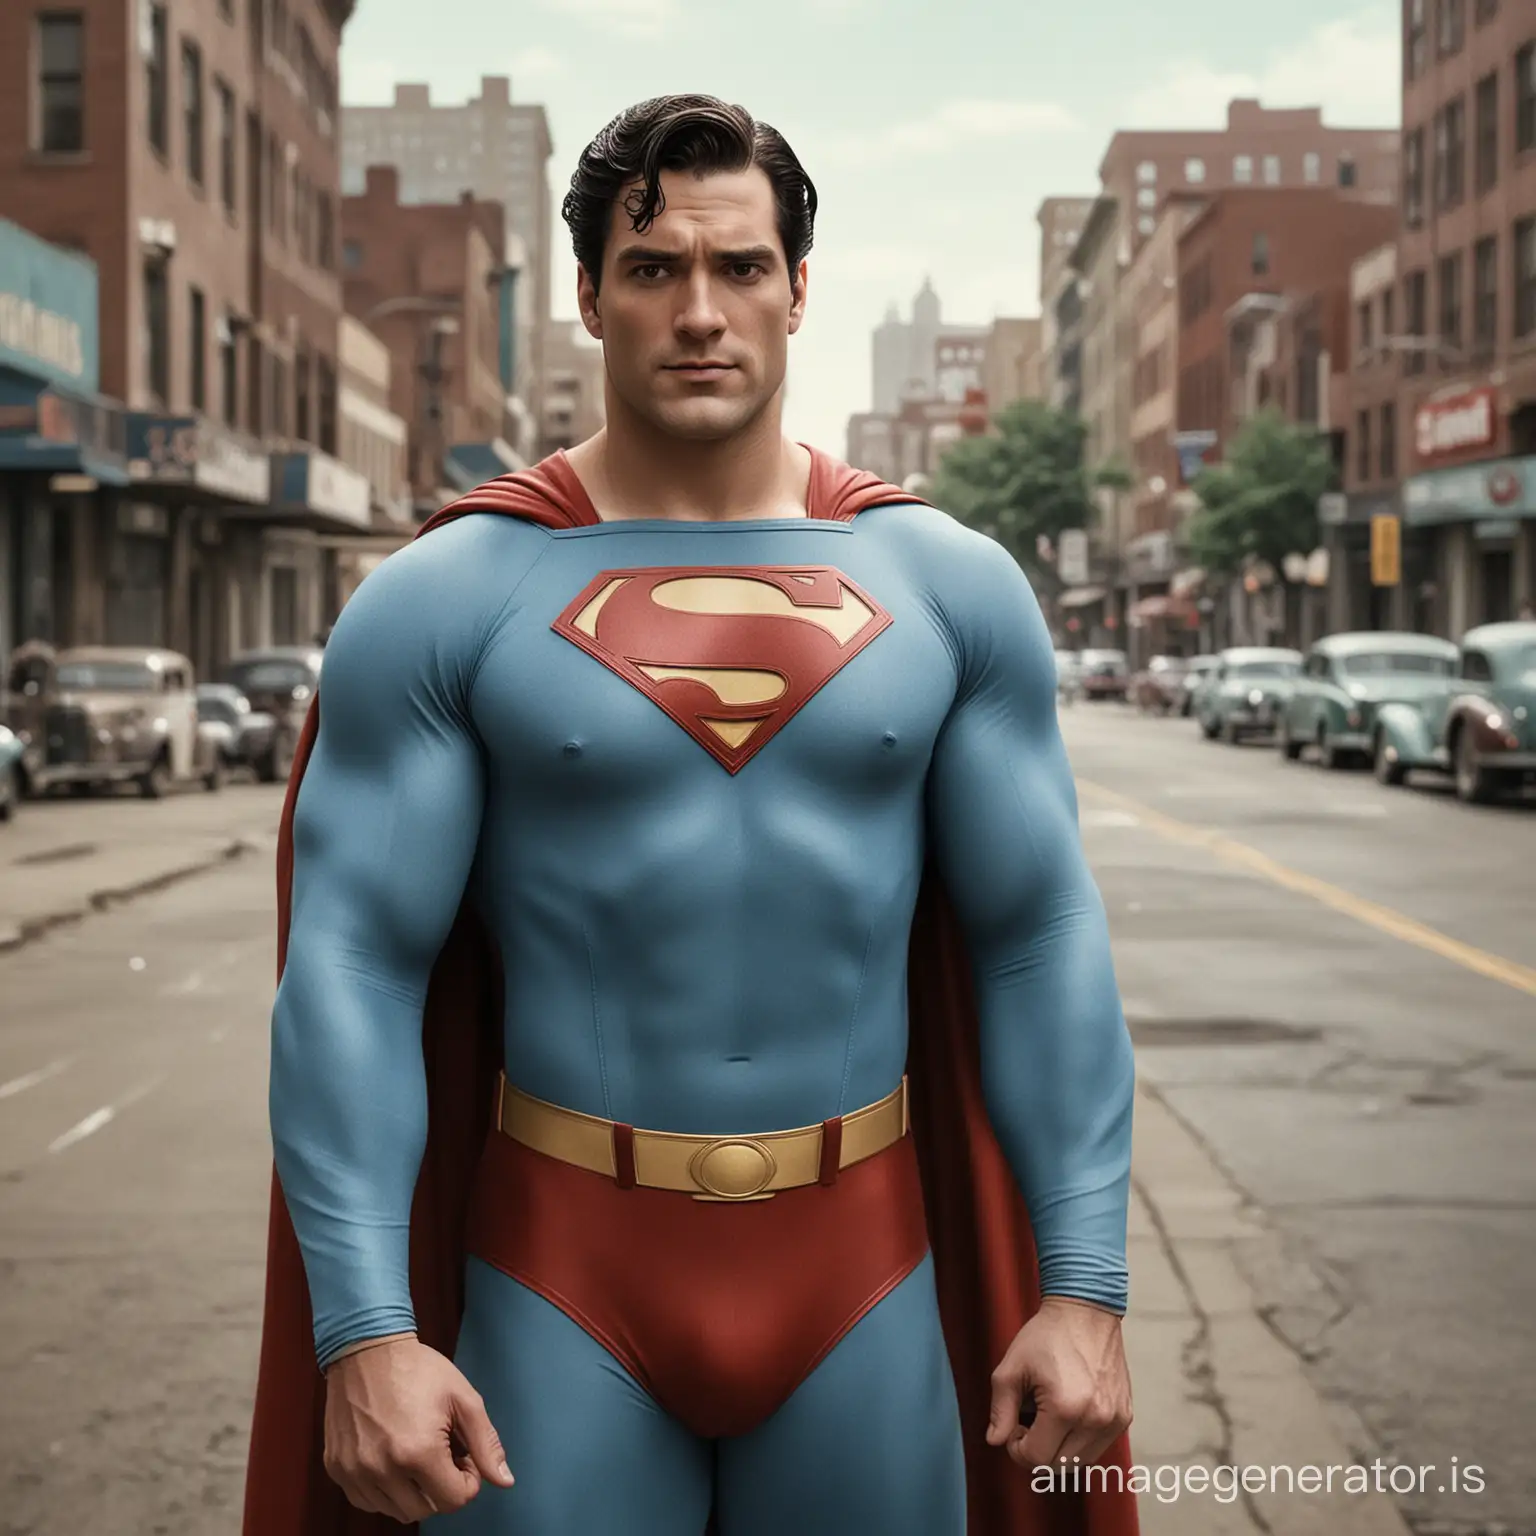 Realistic picture of Superman in a 1930s American city. Superman. Original comiclook. Accurate. Live-action. Superman wears a light blue Superman suit. He looks like in his very first appearance in comics. Superman. 1930s comic style. Realistic picture. Epic movie.